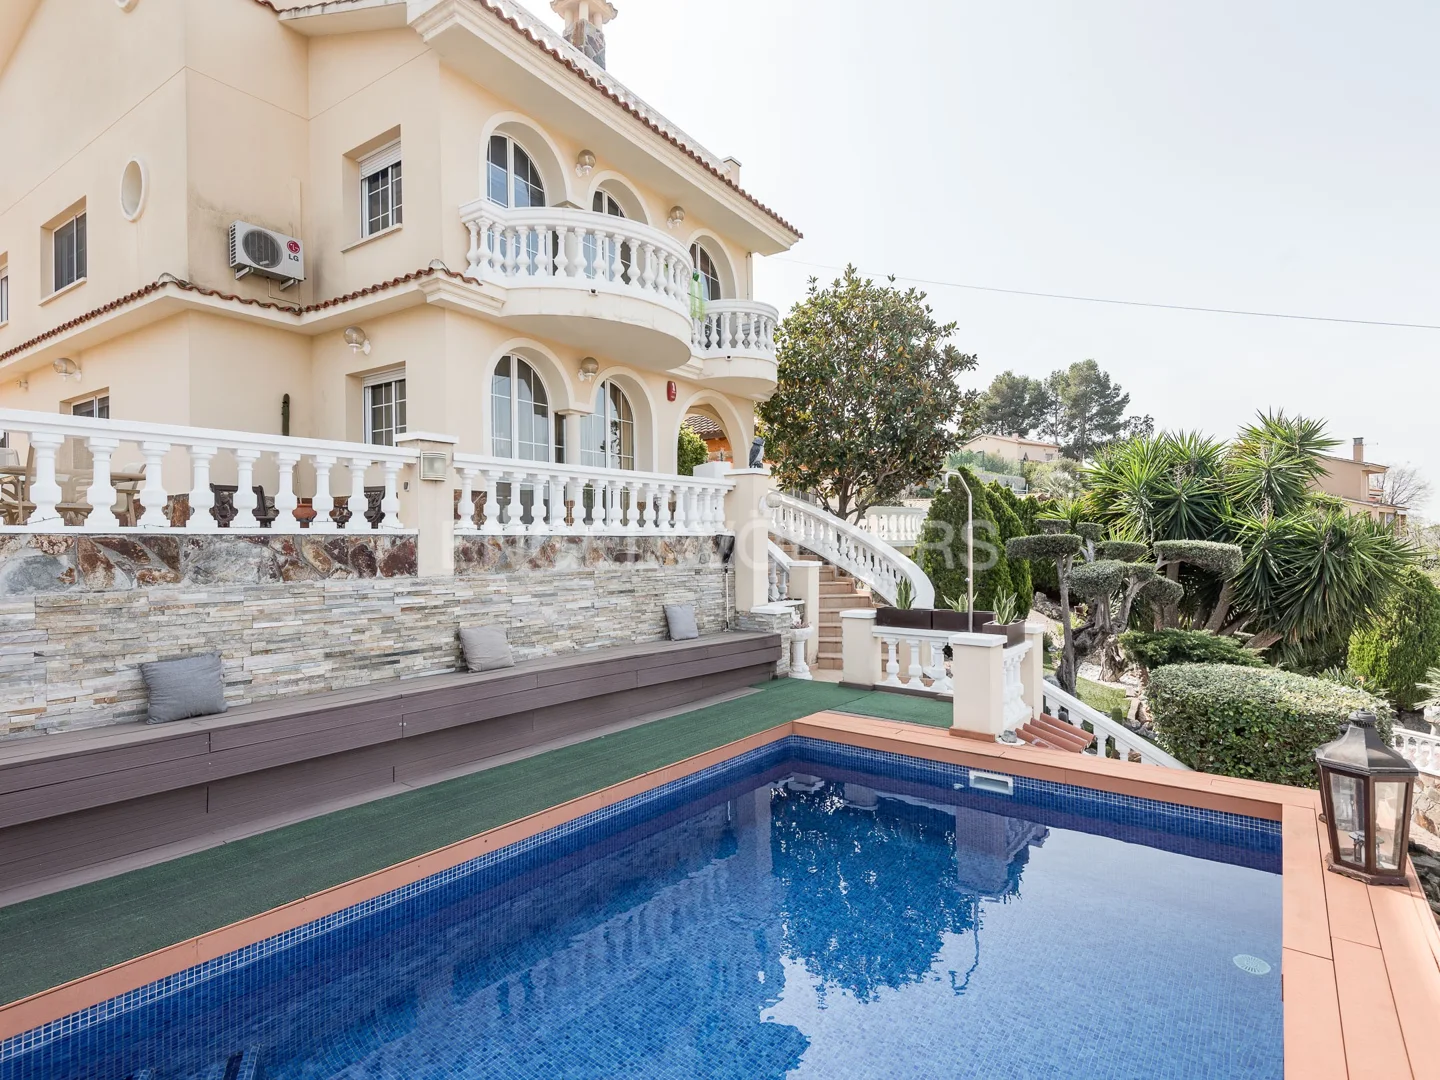 A spectacular villa with a swimming pool and garden